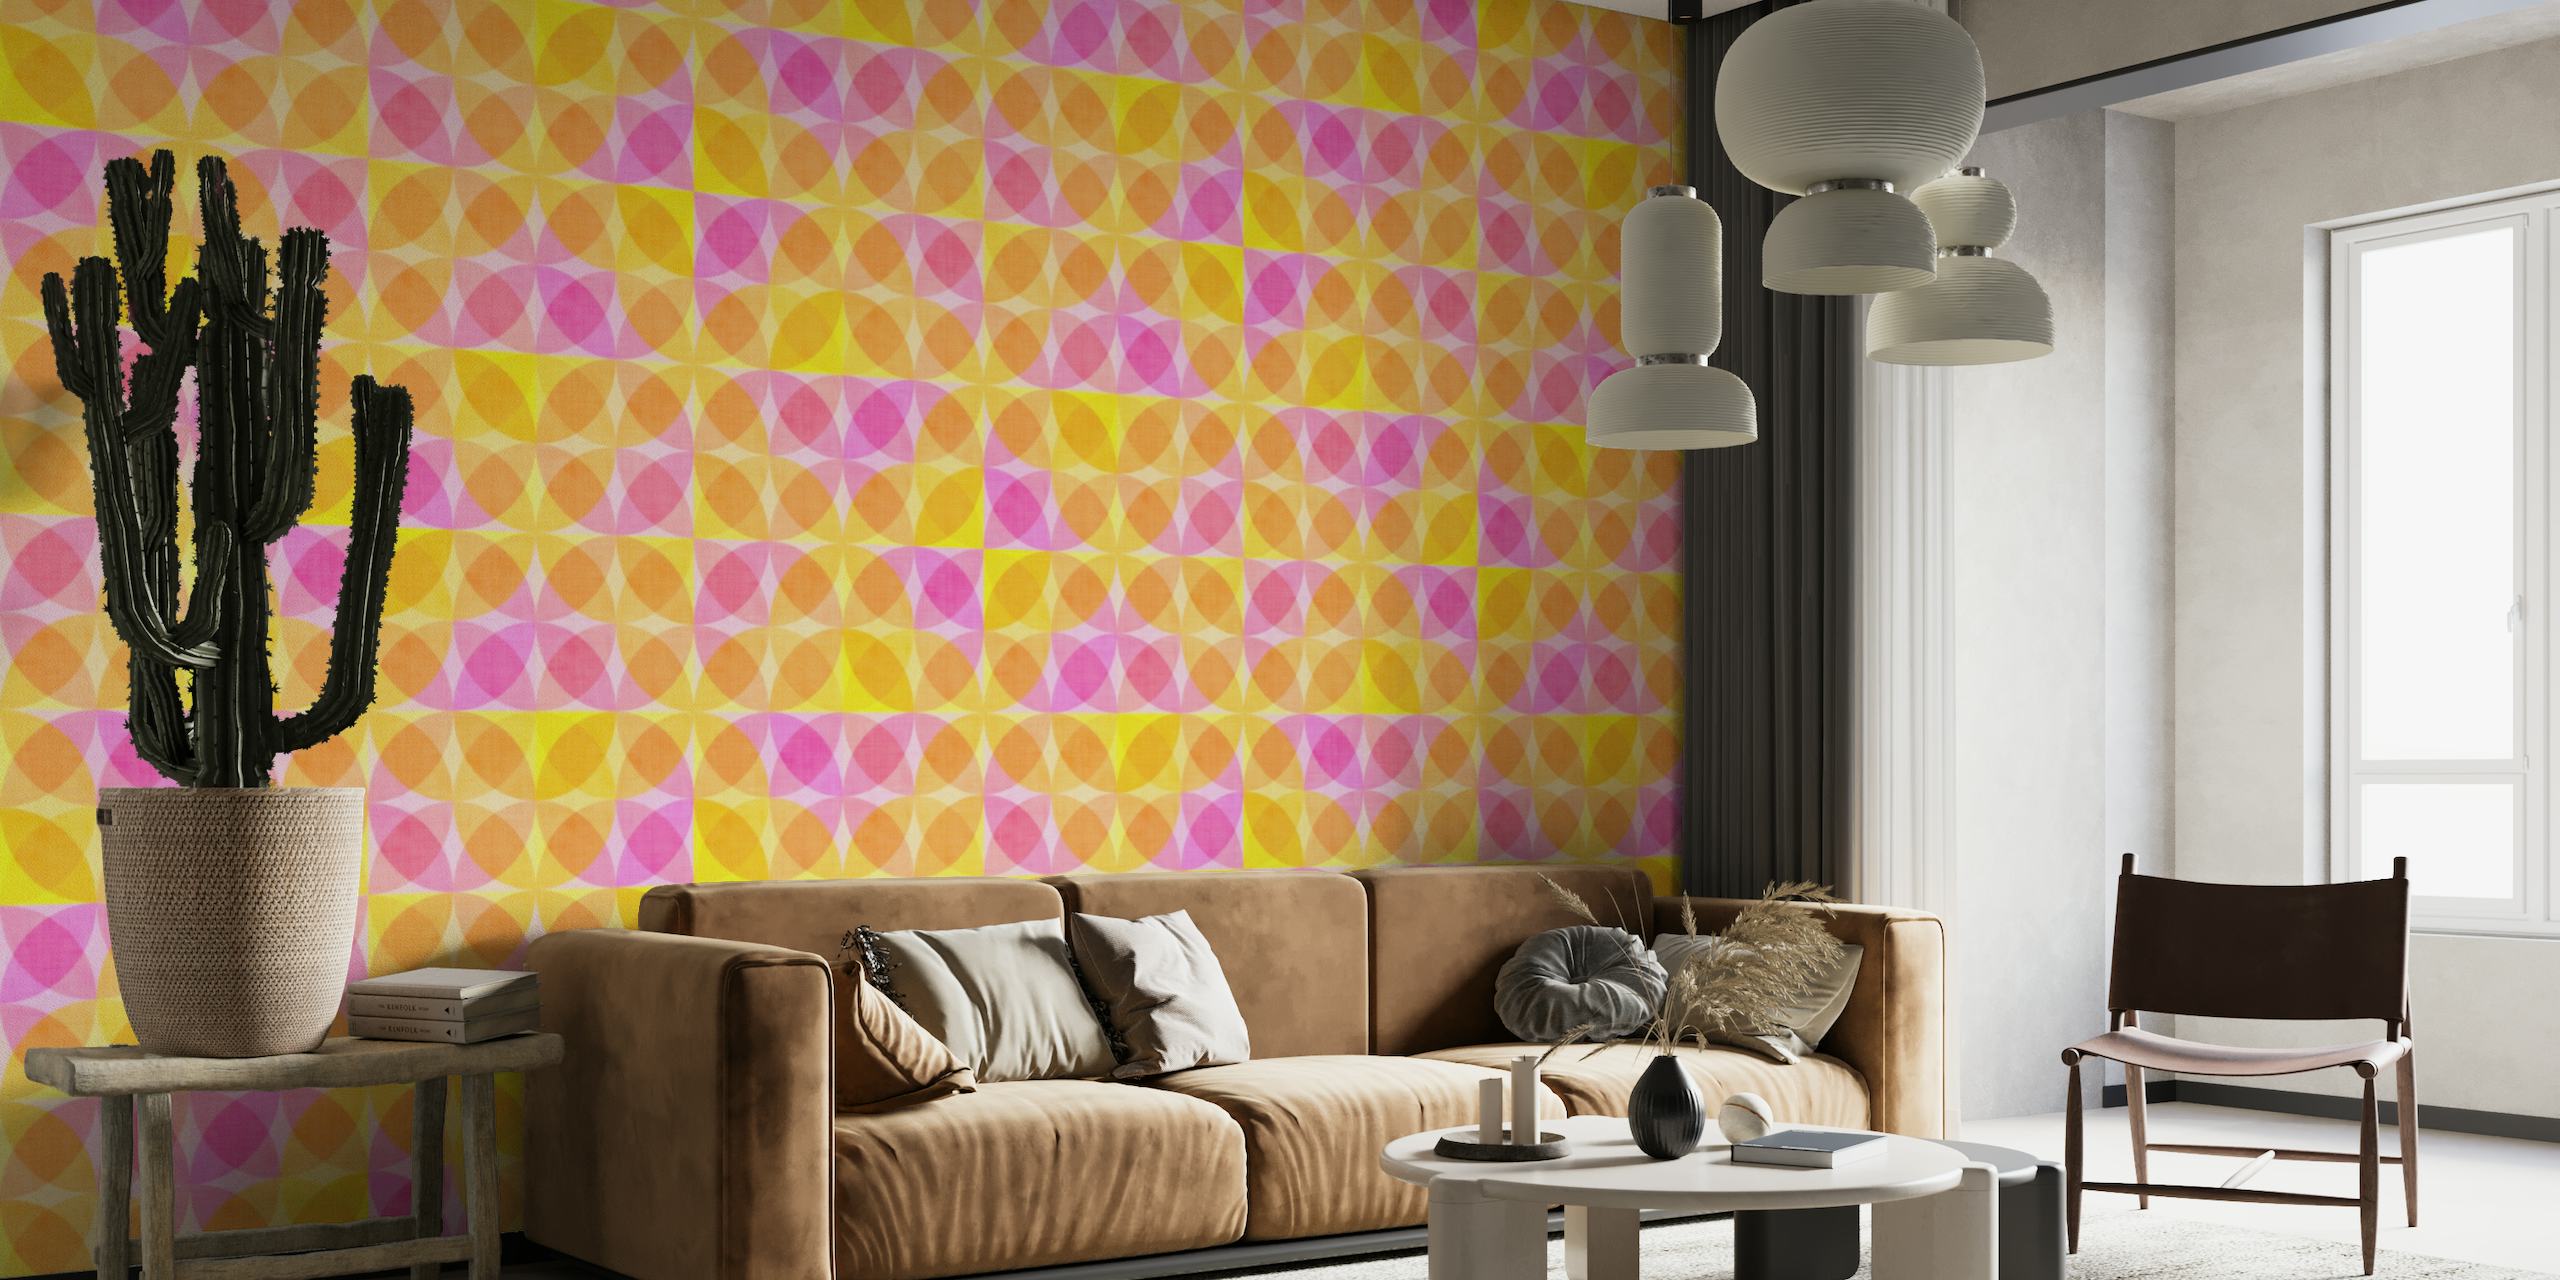 Party Geometric Shapes Pink Orange and Yellow tapetit